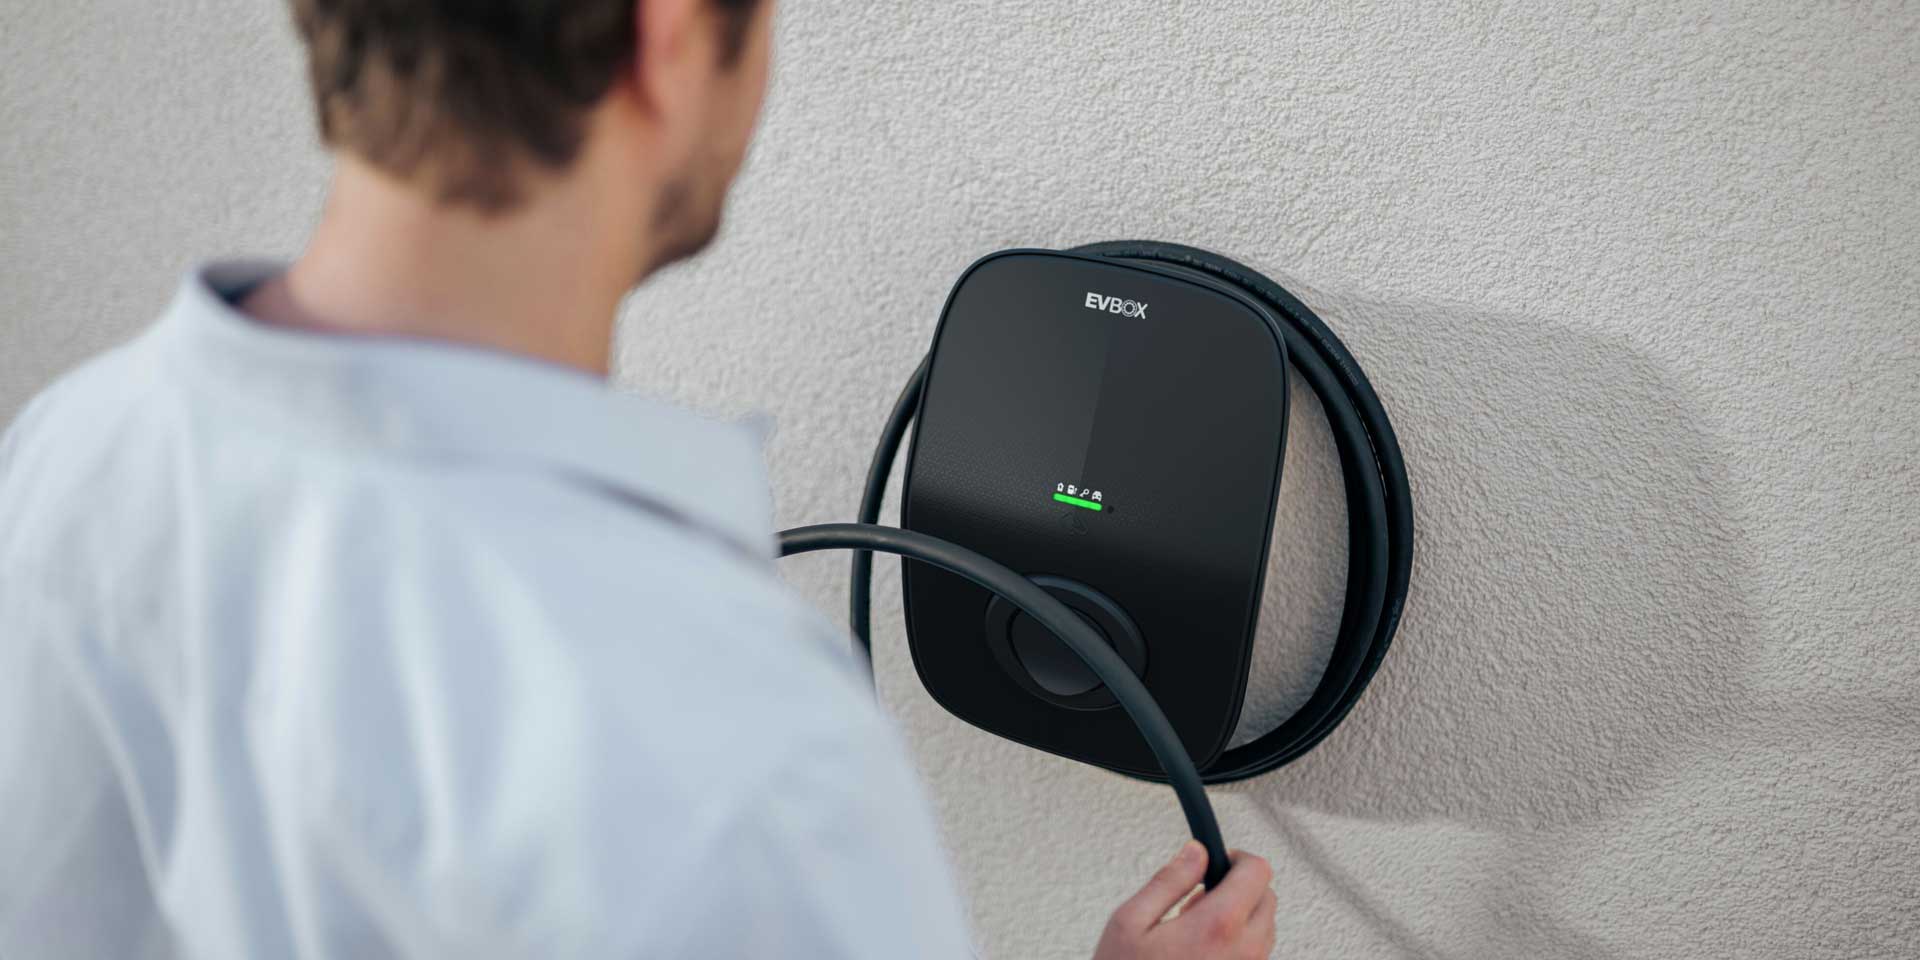 A Level 2 AC home charging station, EVBox Livo, mounted to a wall.